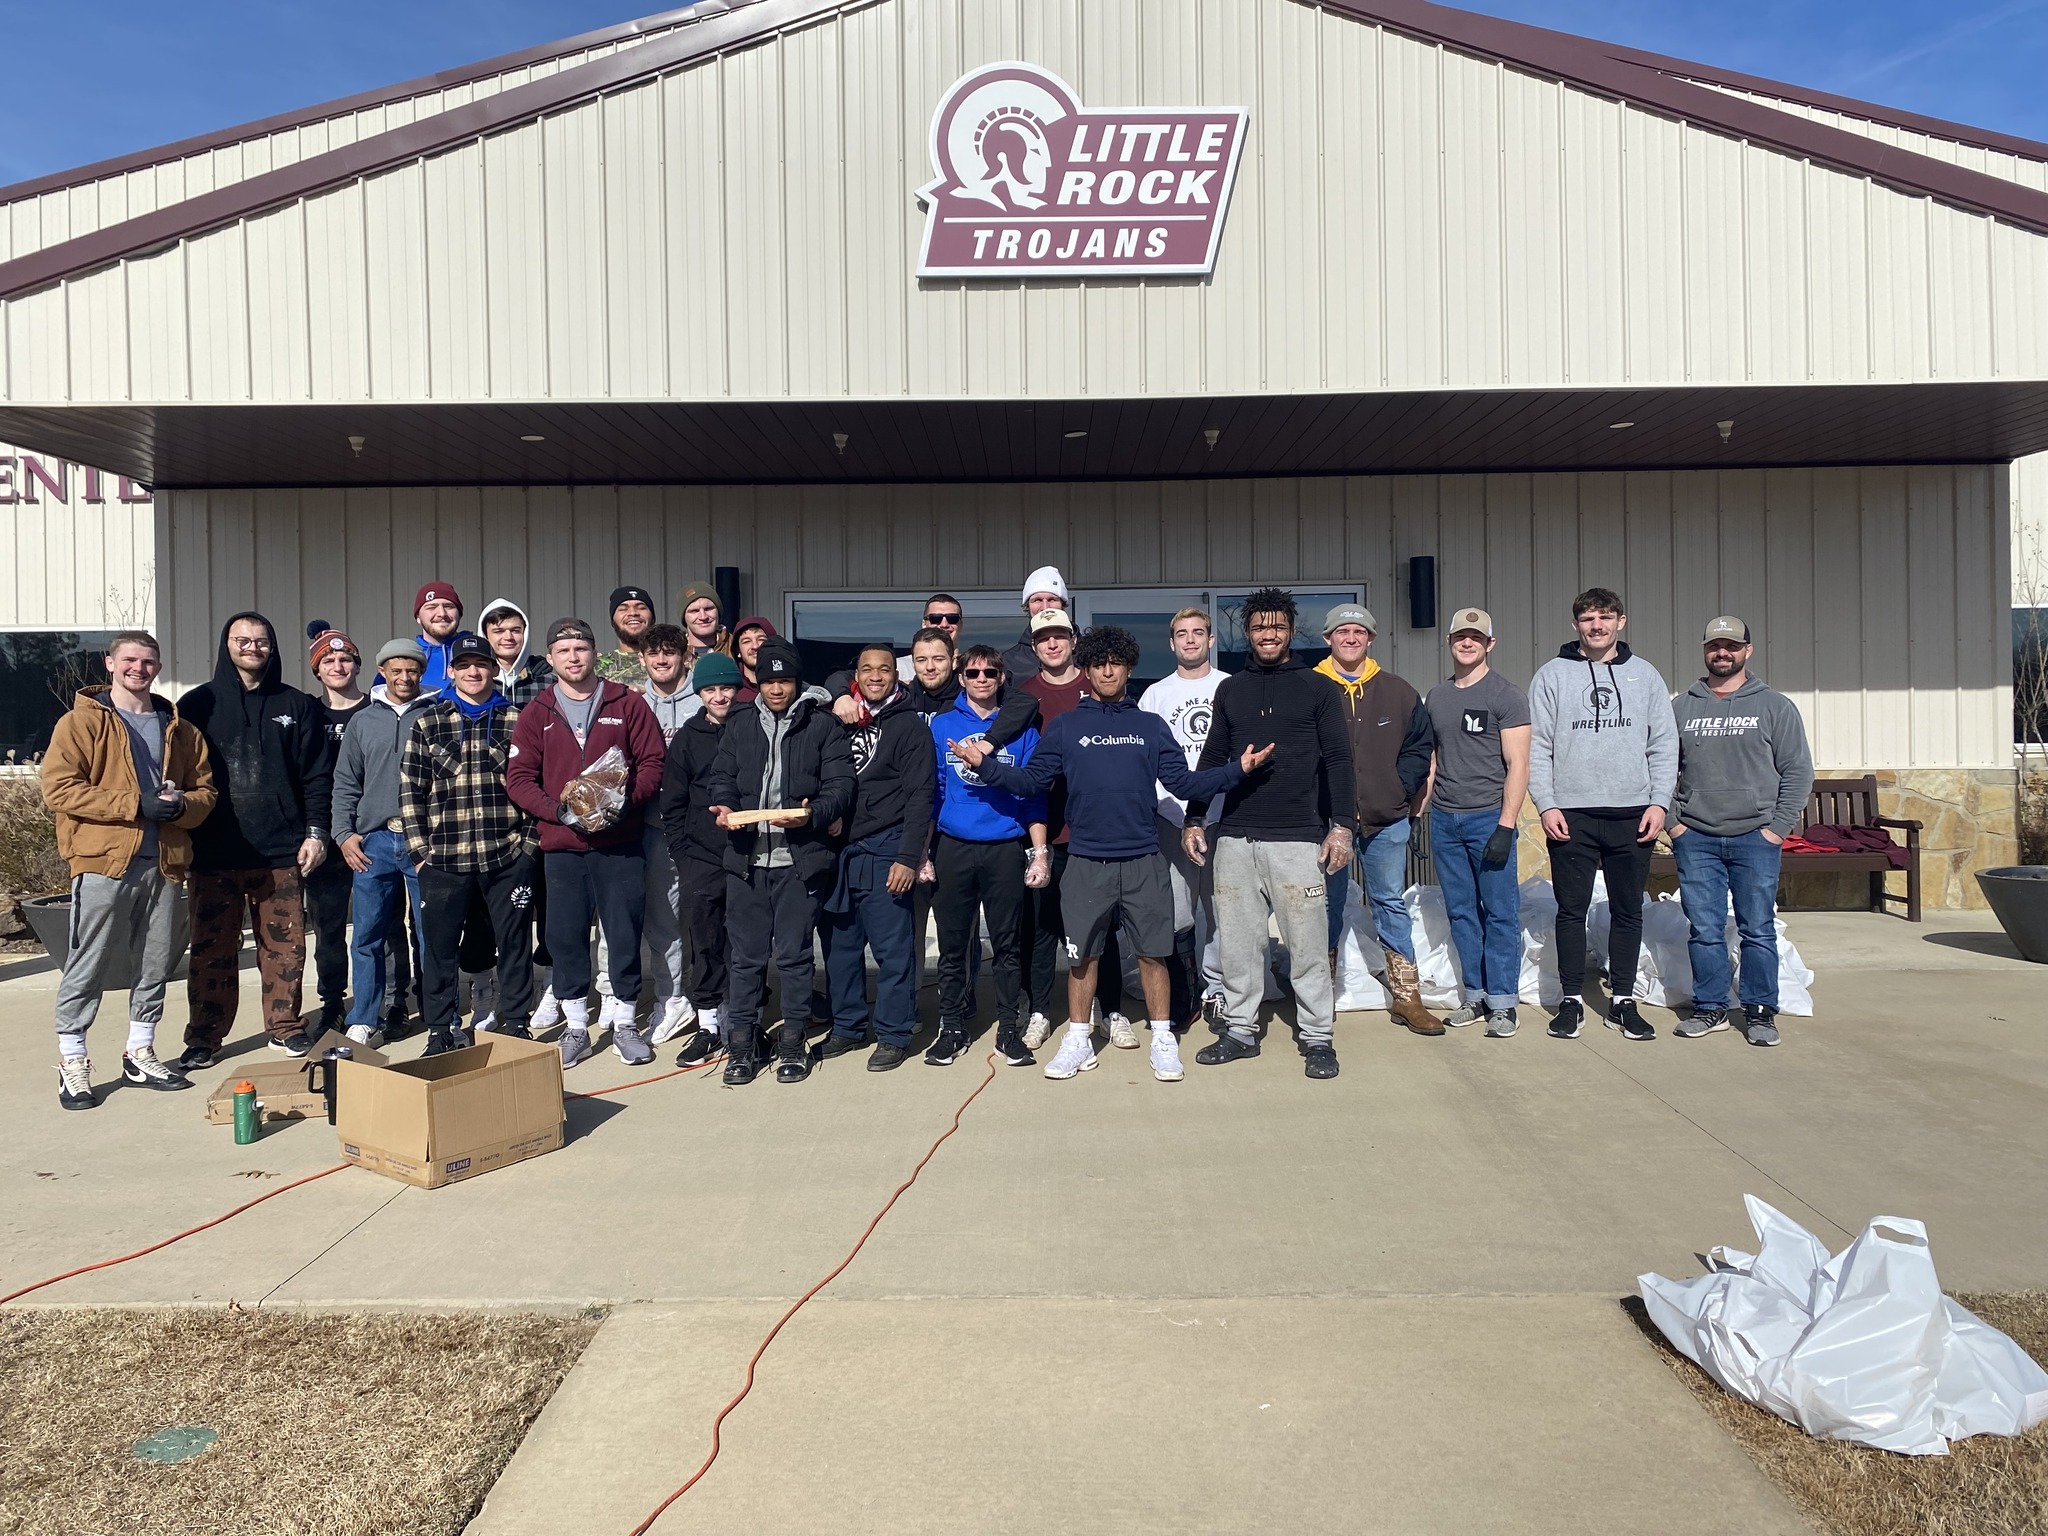 These Little Rock Wrestling Team members helped bring some holiday cheer to the people of central Arkansas by donating about 250 hams to the nonprofit Every Arkansan.